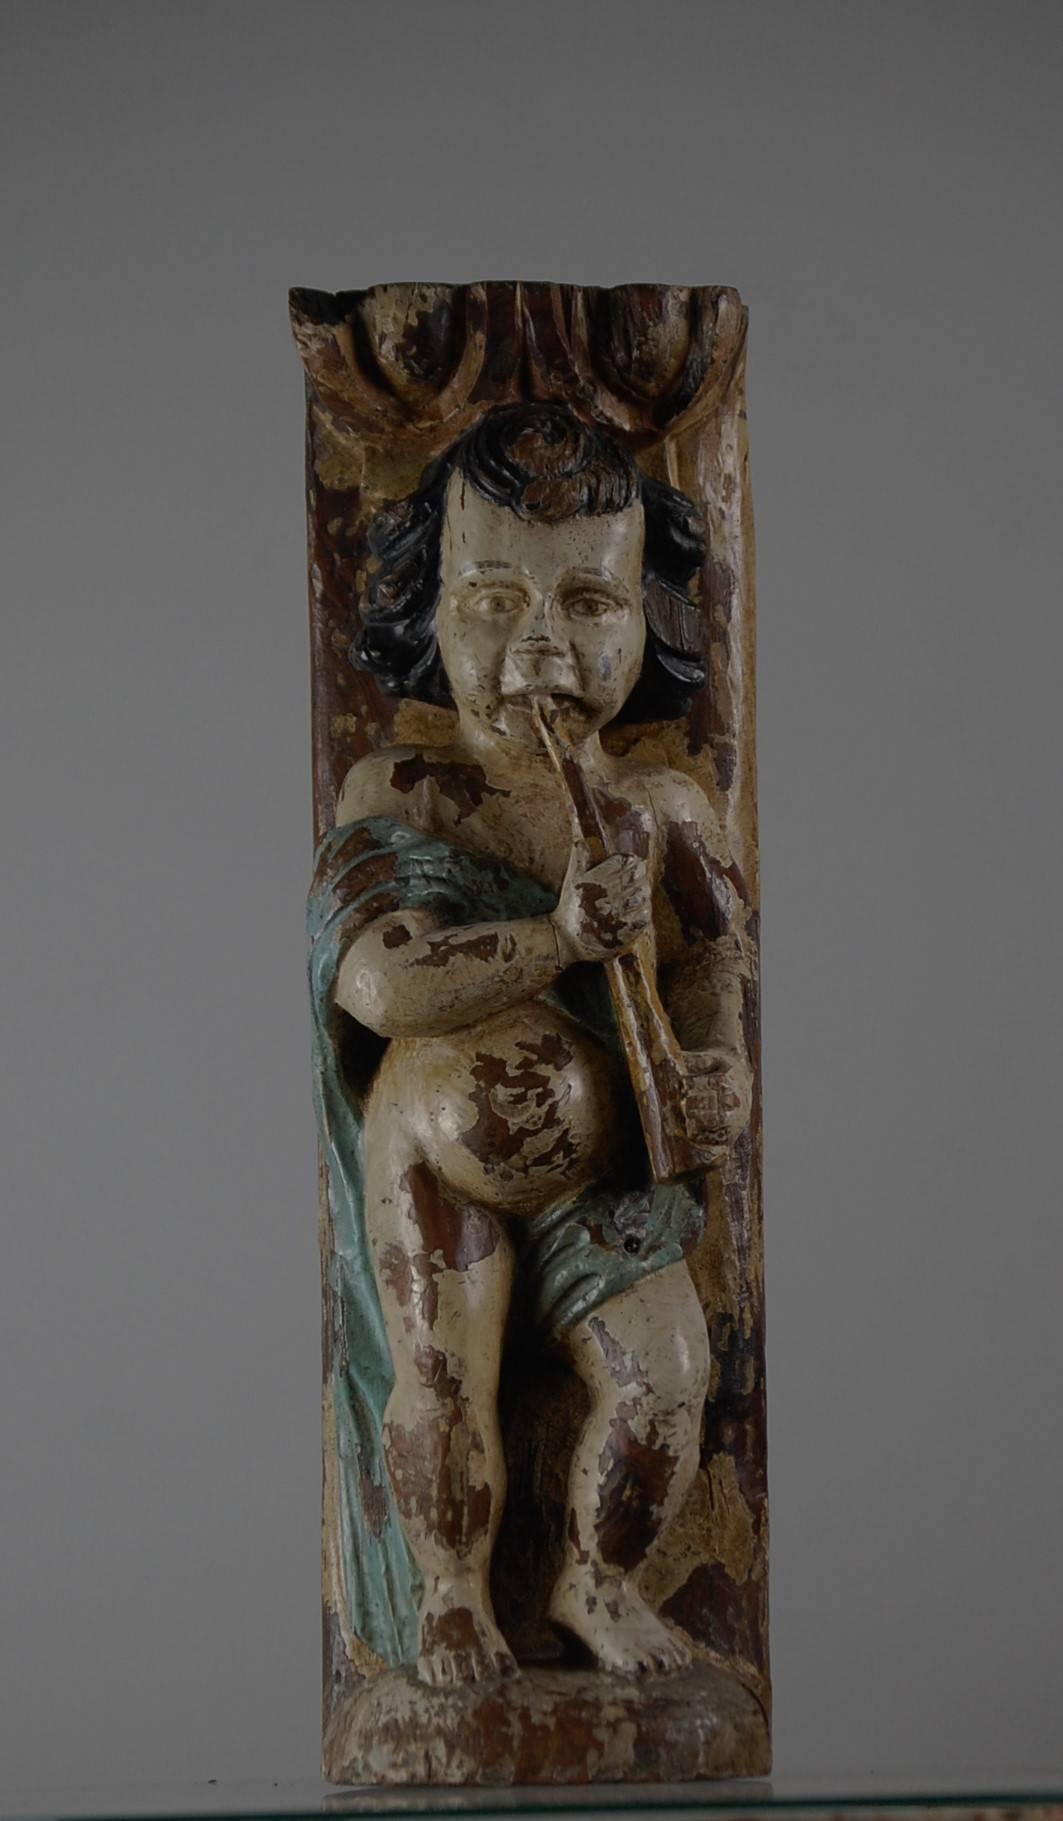 A wonderful carved wood cherub or putti playing a trumpet, distressed original polychrome finish. Believed to be a fragment from a French fairground organ, circa 1860.